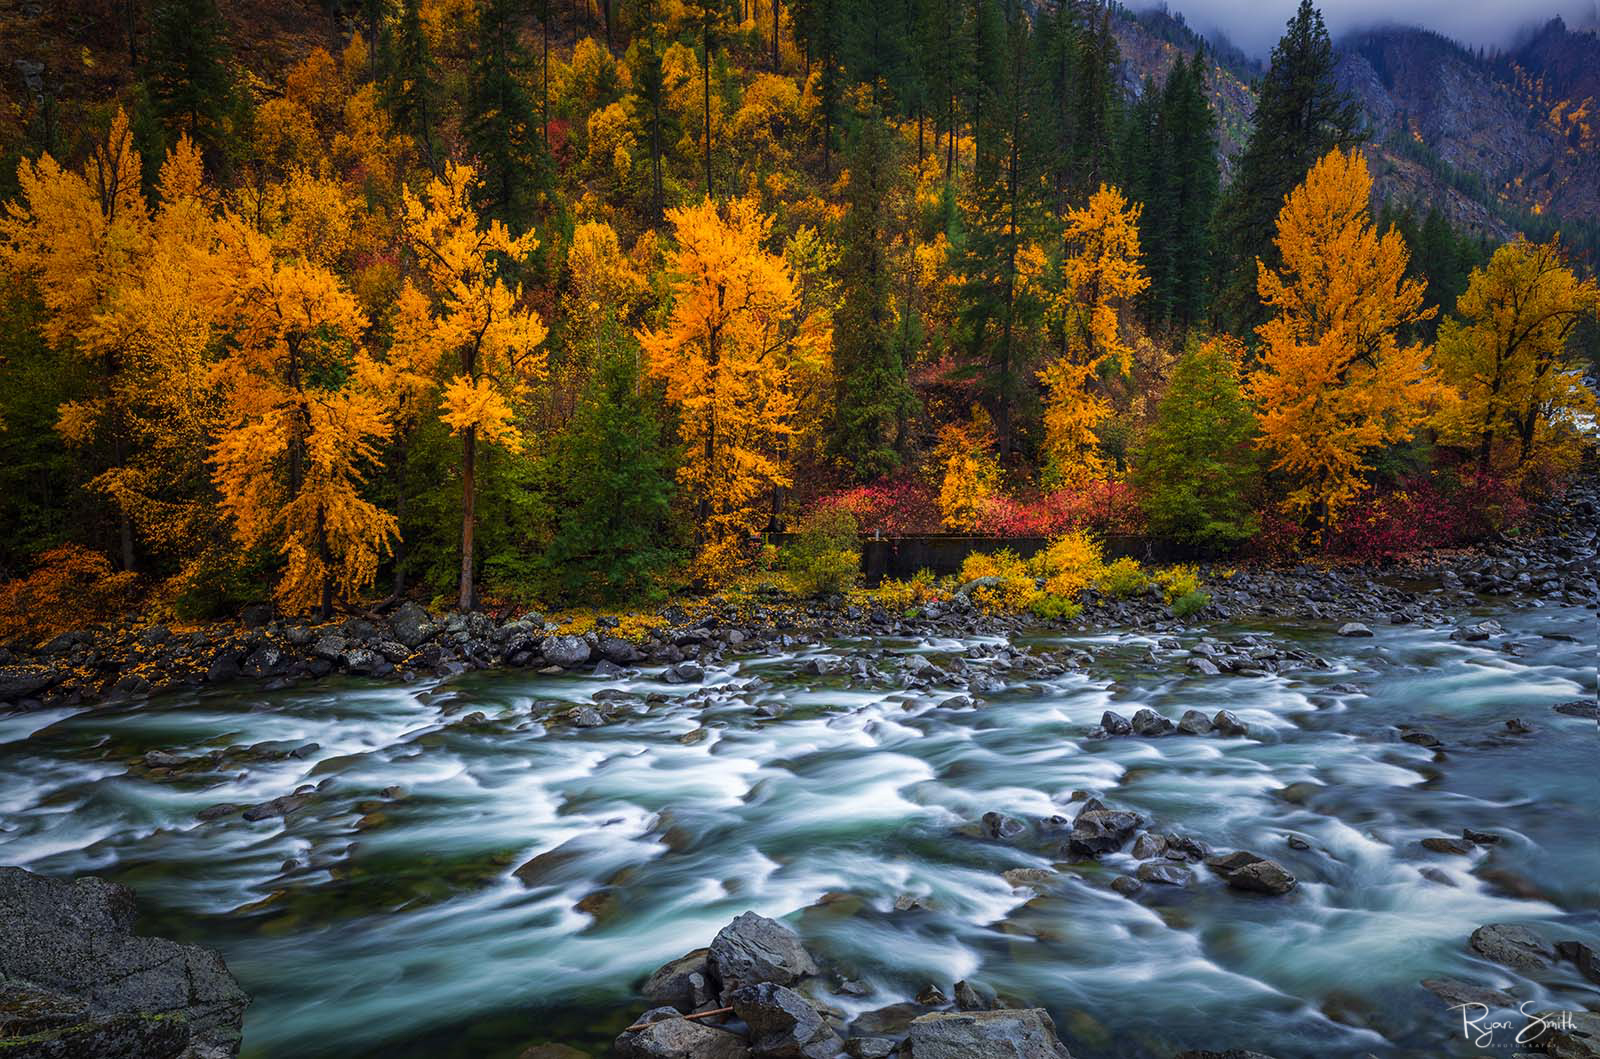 A rocky river is surrounded by trees with yellow and red leaves as well as spruce trees adding green to the scene with blue water and rush of water.